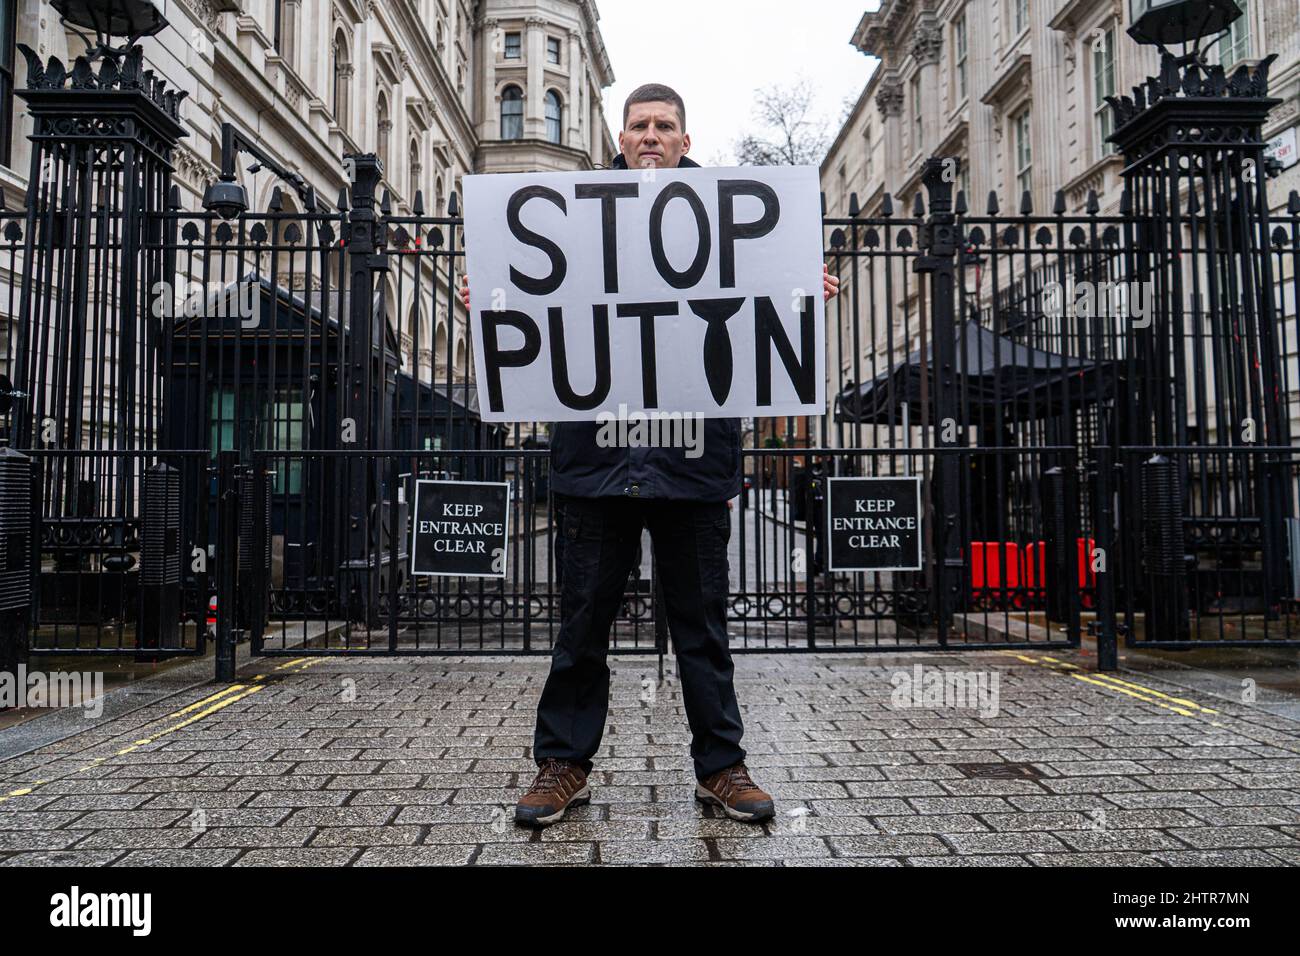 WESTMINSTER LONDON, UK. 2  March, 2022.  A protester stands  outside Downing Street with a sign 'Stop Putin' against the military invasion of Ukraine invasion  by Russia now in it's seventh day which has drawn  condemnation and protests  across cities in the world and triggered sanctions targeting Russian economic interests. Credit: amer ghazzal/Alamy Live News Stock Photo